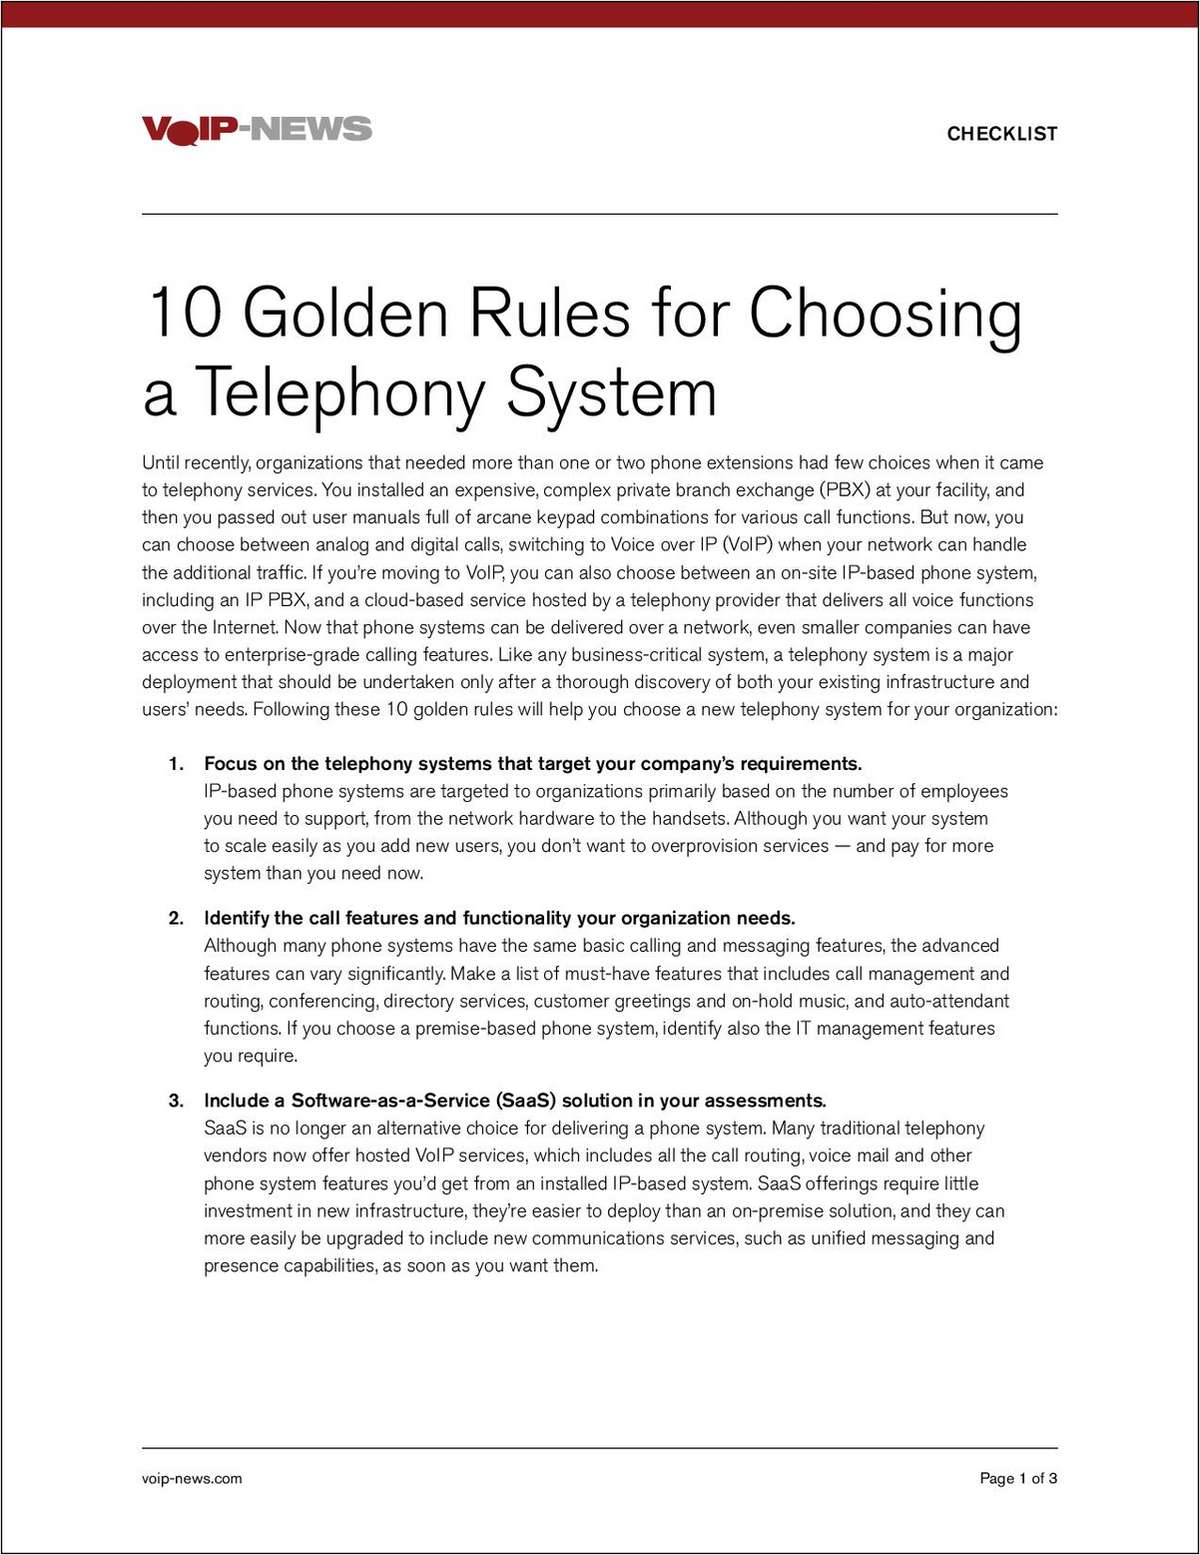 10 Golden Rules for Choosing a Phone System